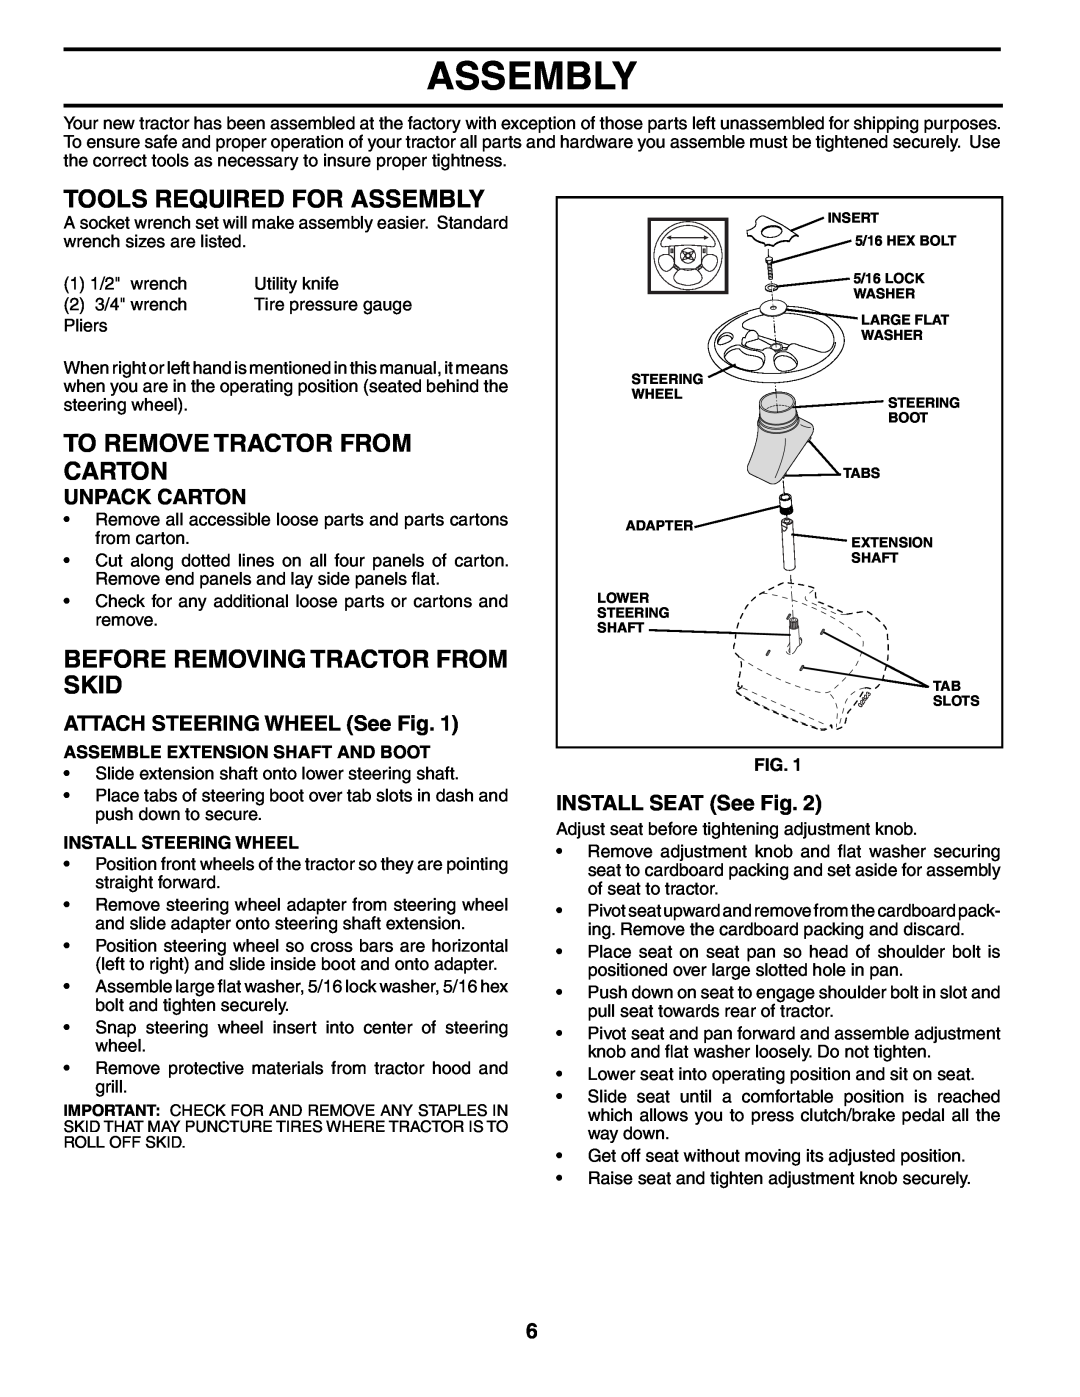 Poulan 96012004600 manual Tools Required For Assembly, To Remove Tractor From Carton, Before Removing Tractor From Skid 